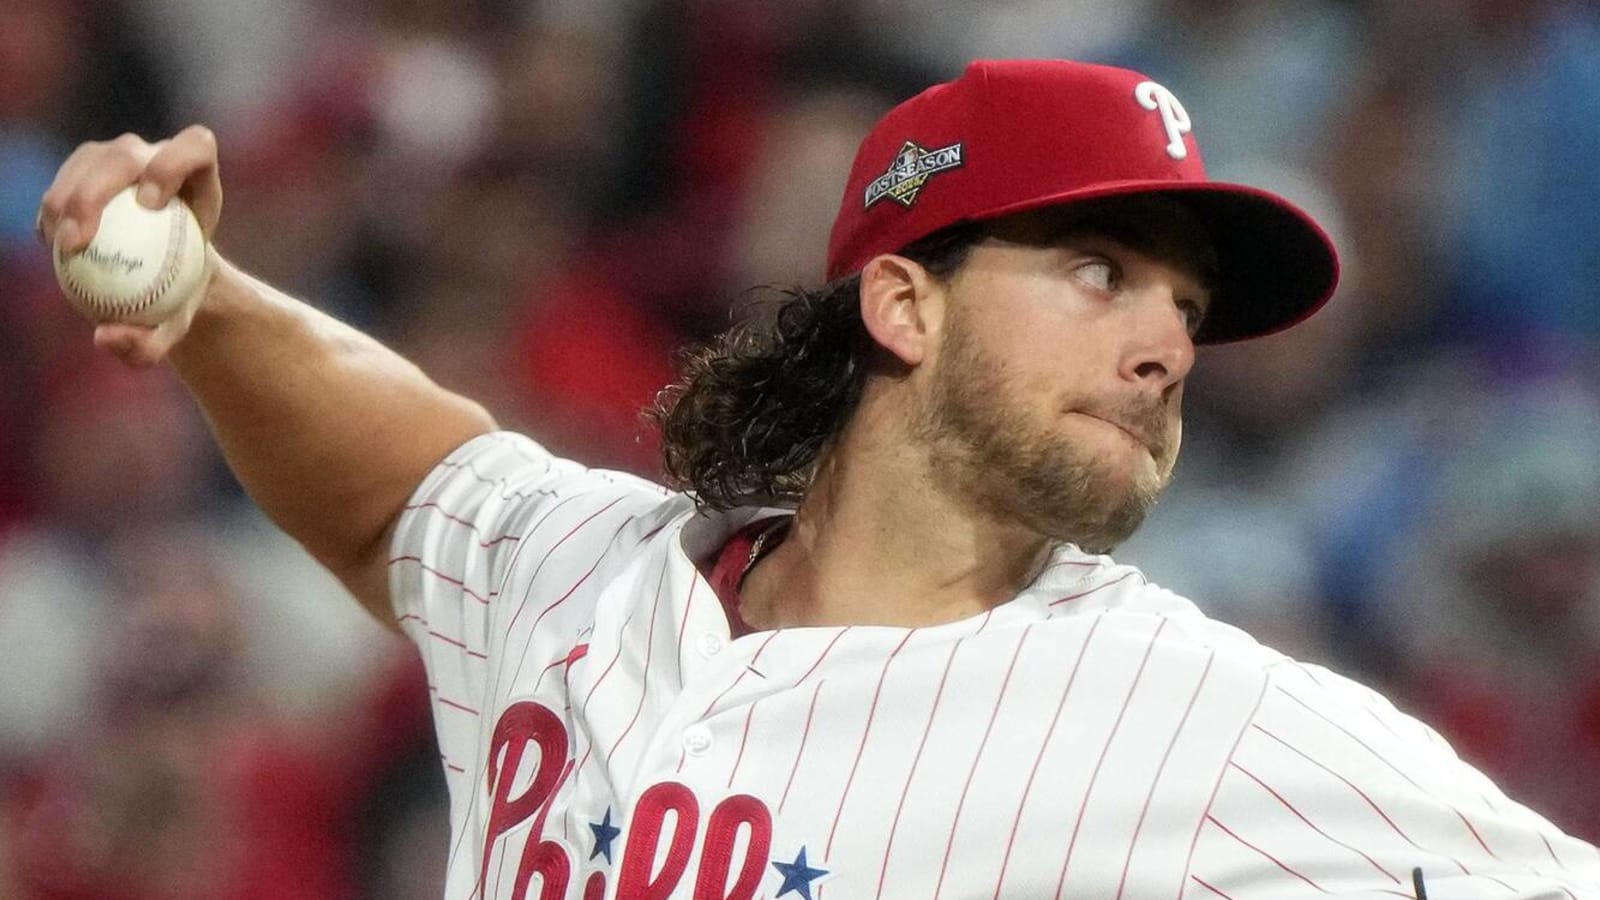 Nola's gem helps Phillies take 2-0 NLCS lead over D-backs